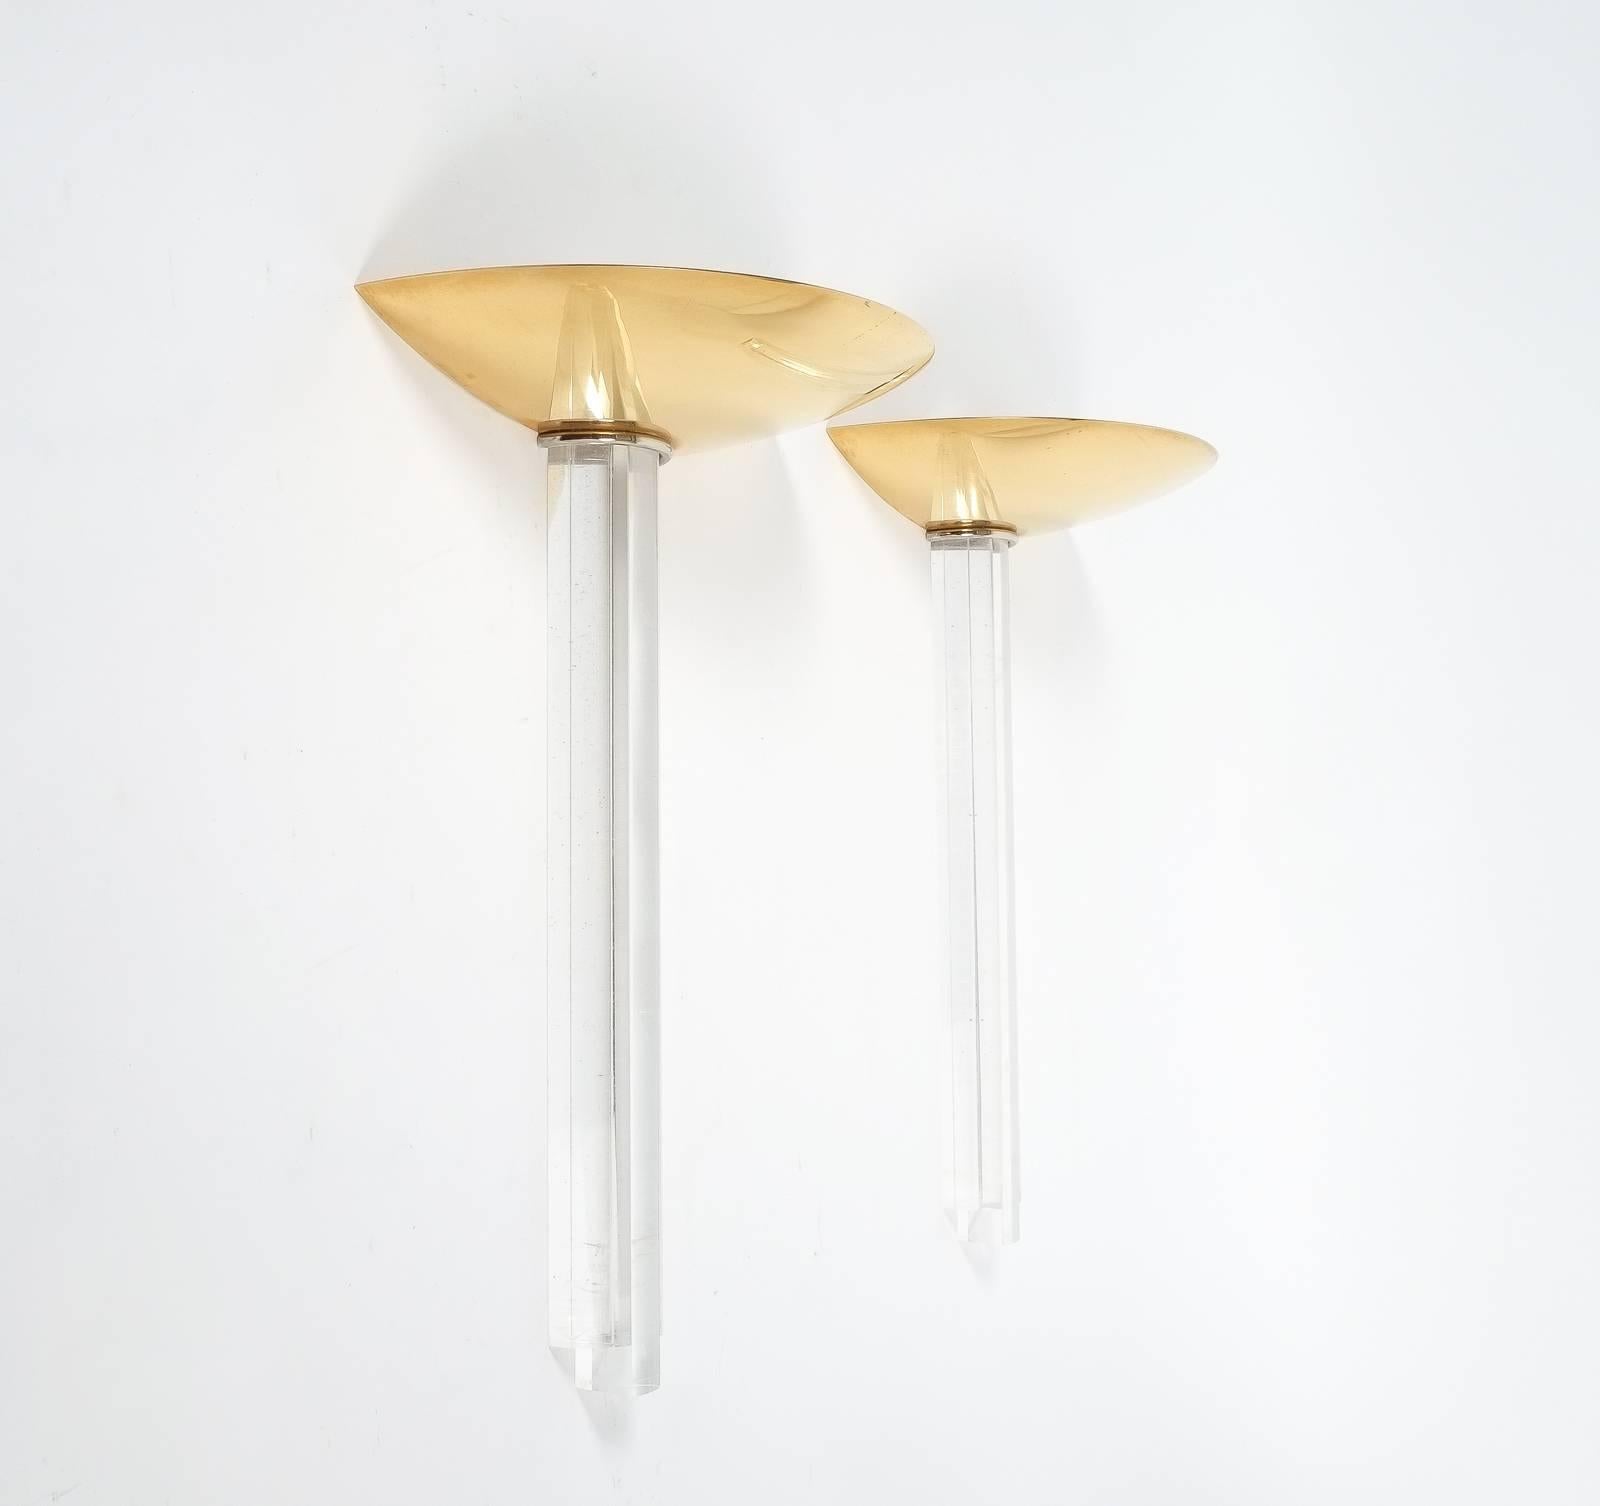 Lage pair of up-pointing lights Art-Deco style, France late mid century

Beautiful pair of very large 22 inch uplights in sthe style of Art Deco artist Jean Perzel. The lamps are comprised of gilt brass and Lucite and are in excellent condition.